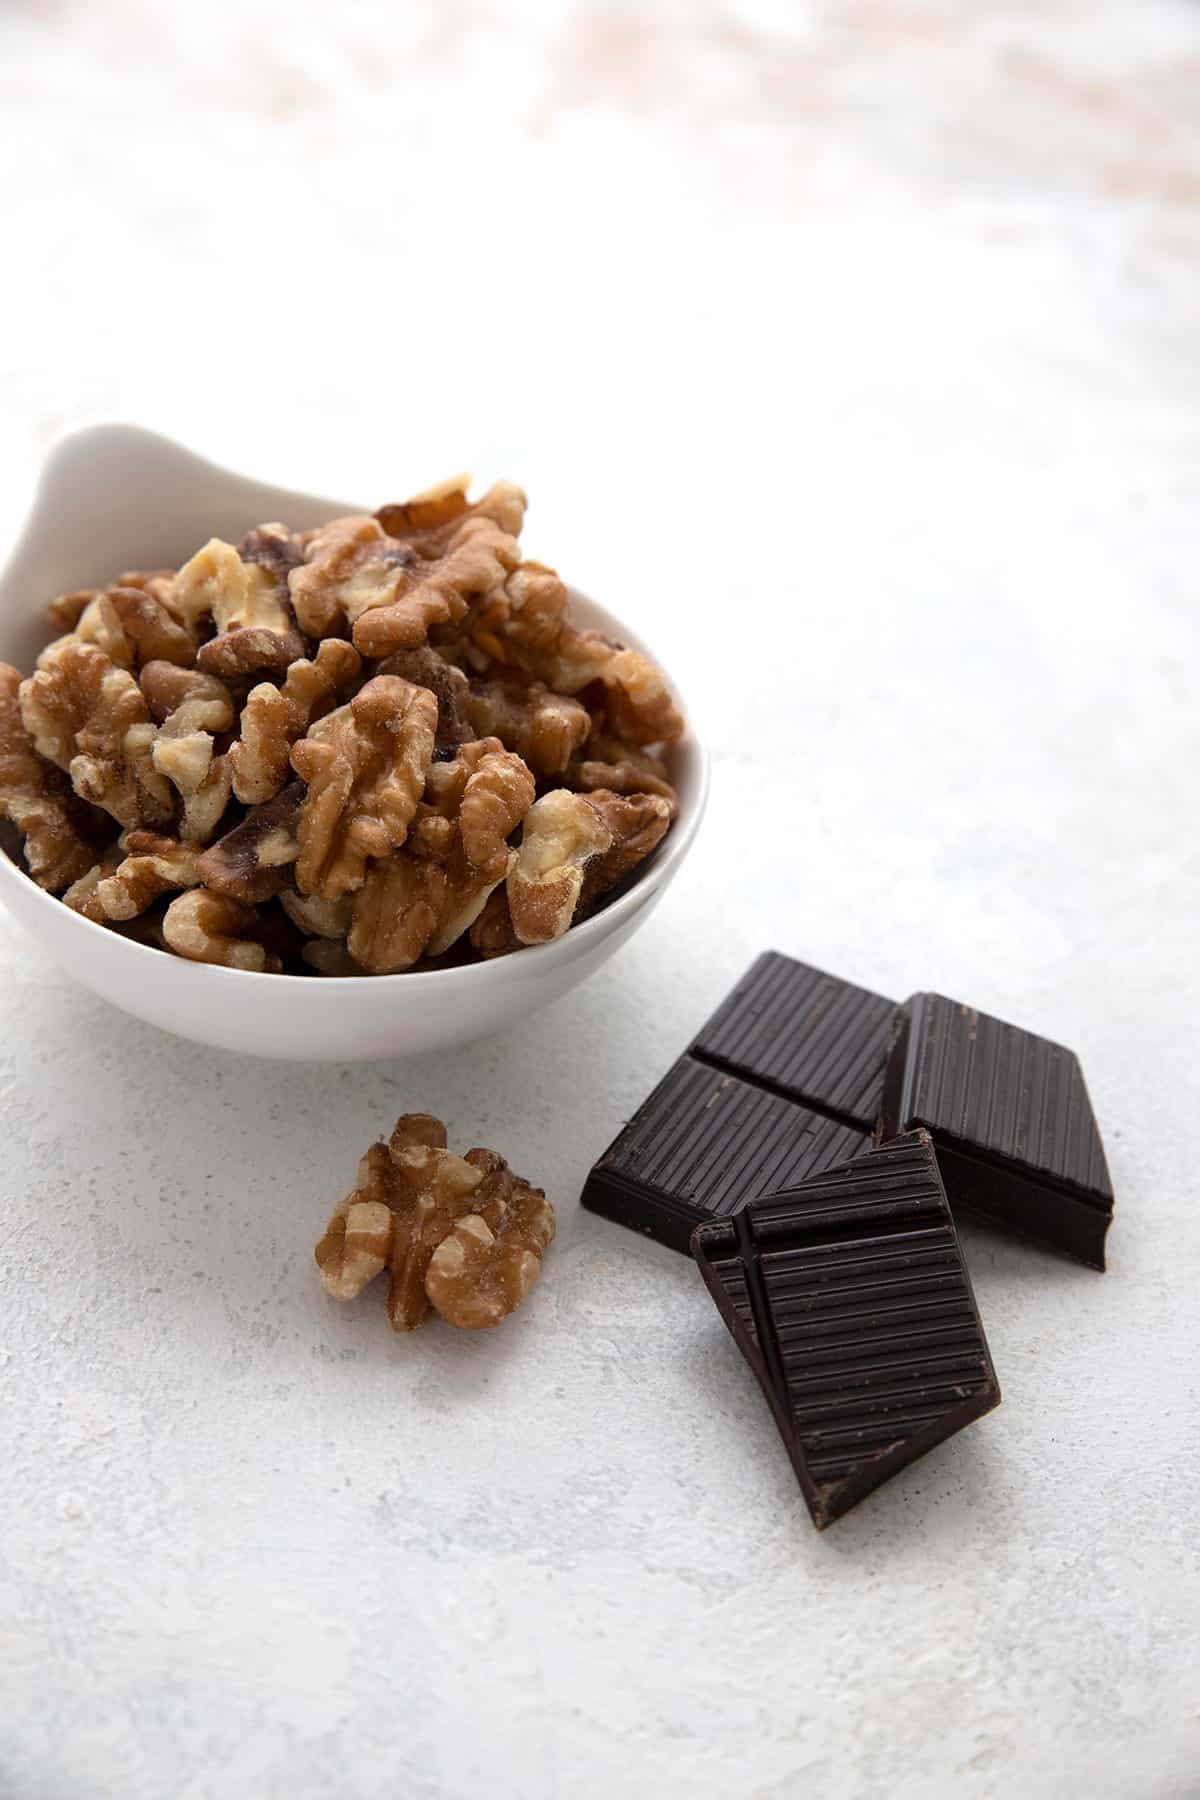 A bowl of walnuts and a few pieces of dark chocolate on a marble table.